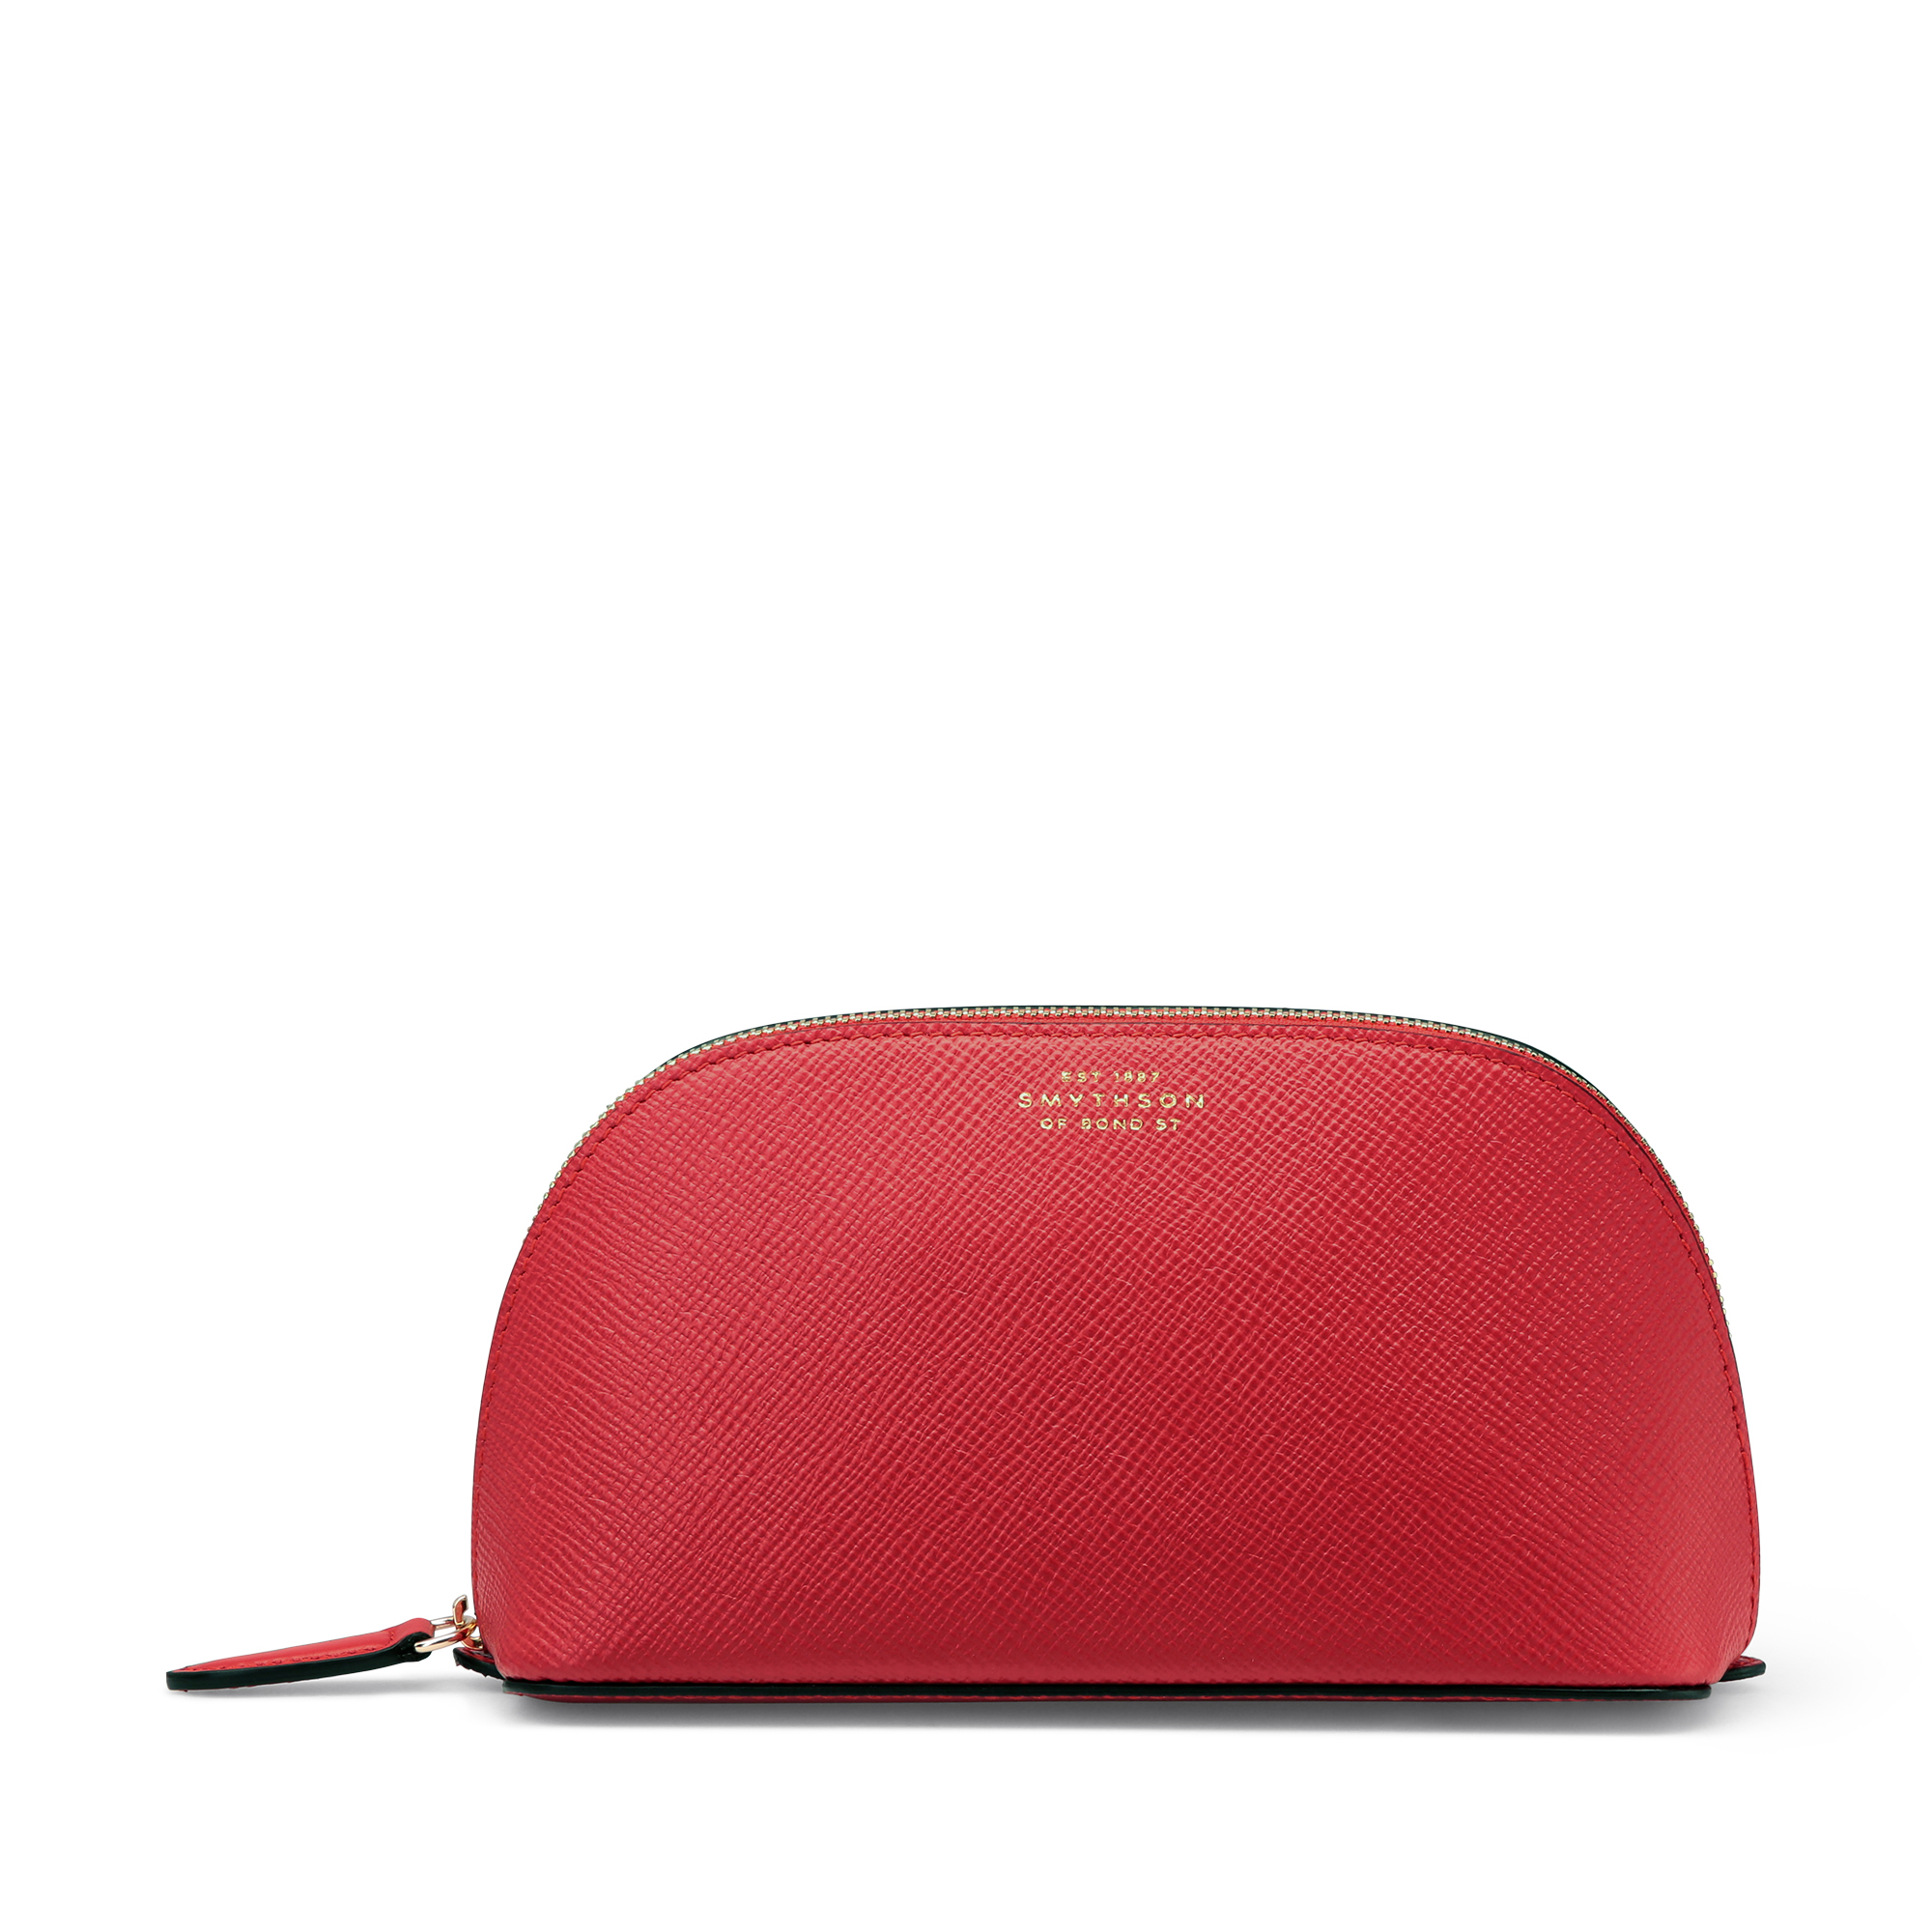 Smythson Cosmetic Case In Panama In Scarlet Red